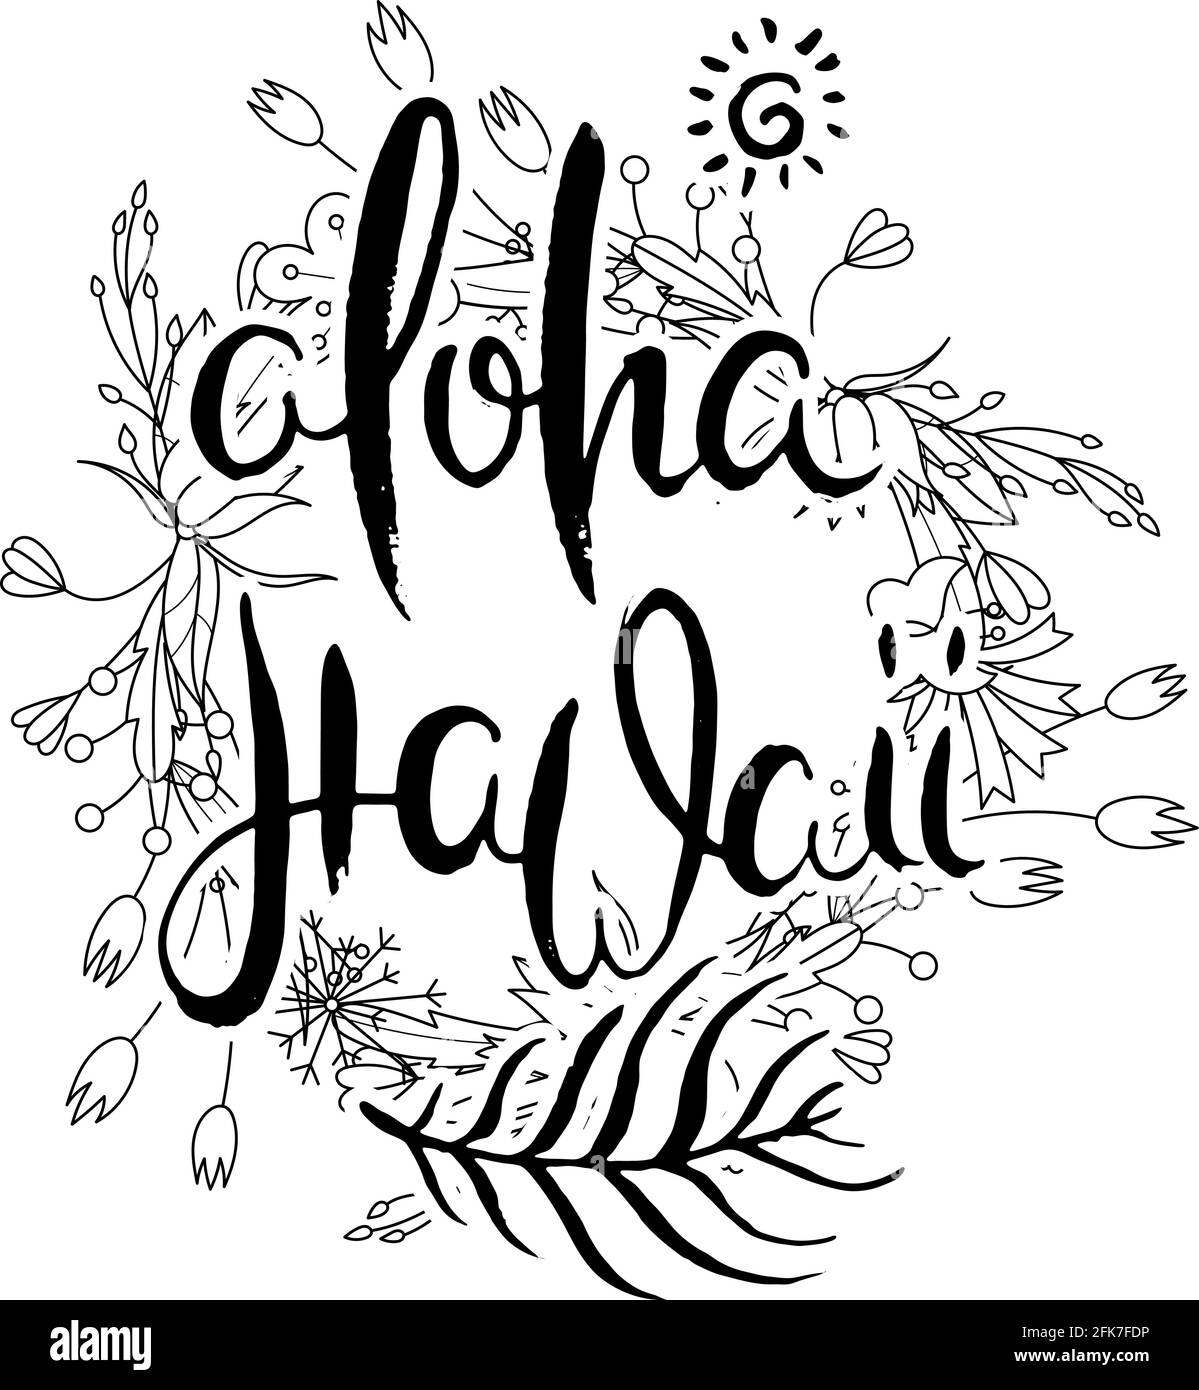 Aloha Hawaii. Hand lettering grunge card with flower background. Handcrafted doodle letters in retro style. Hand-drawn vintage vector typography illus Stock Vector